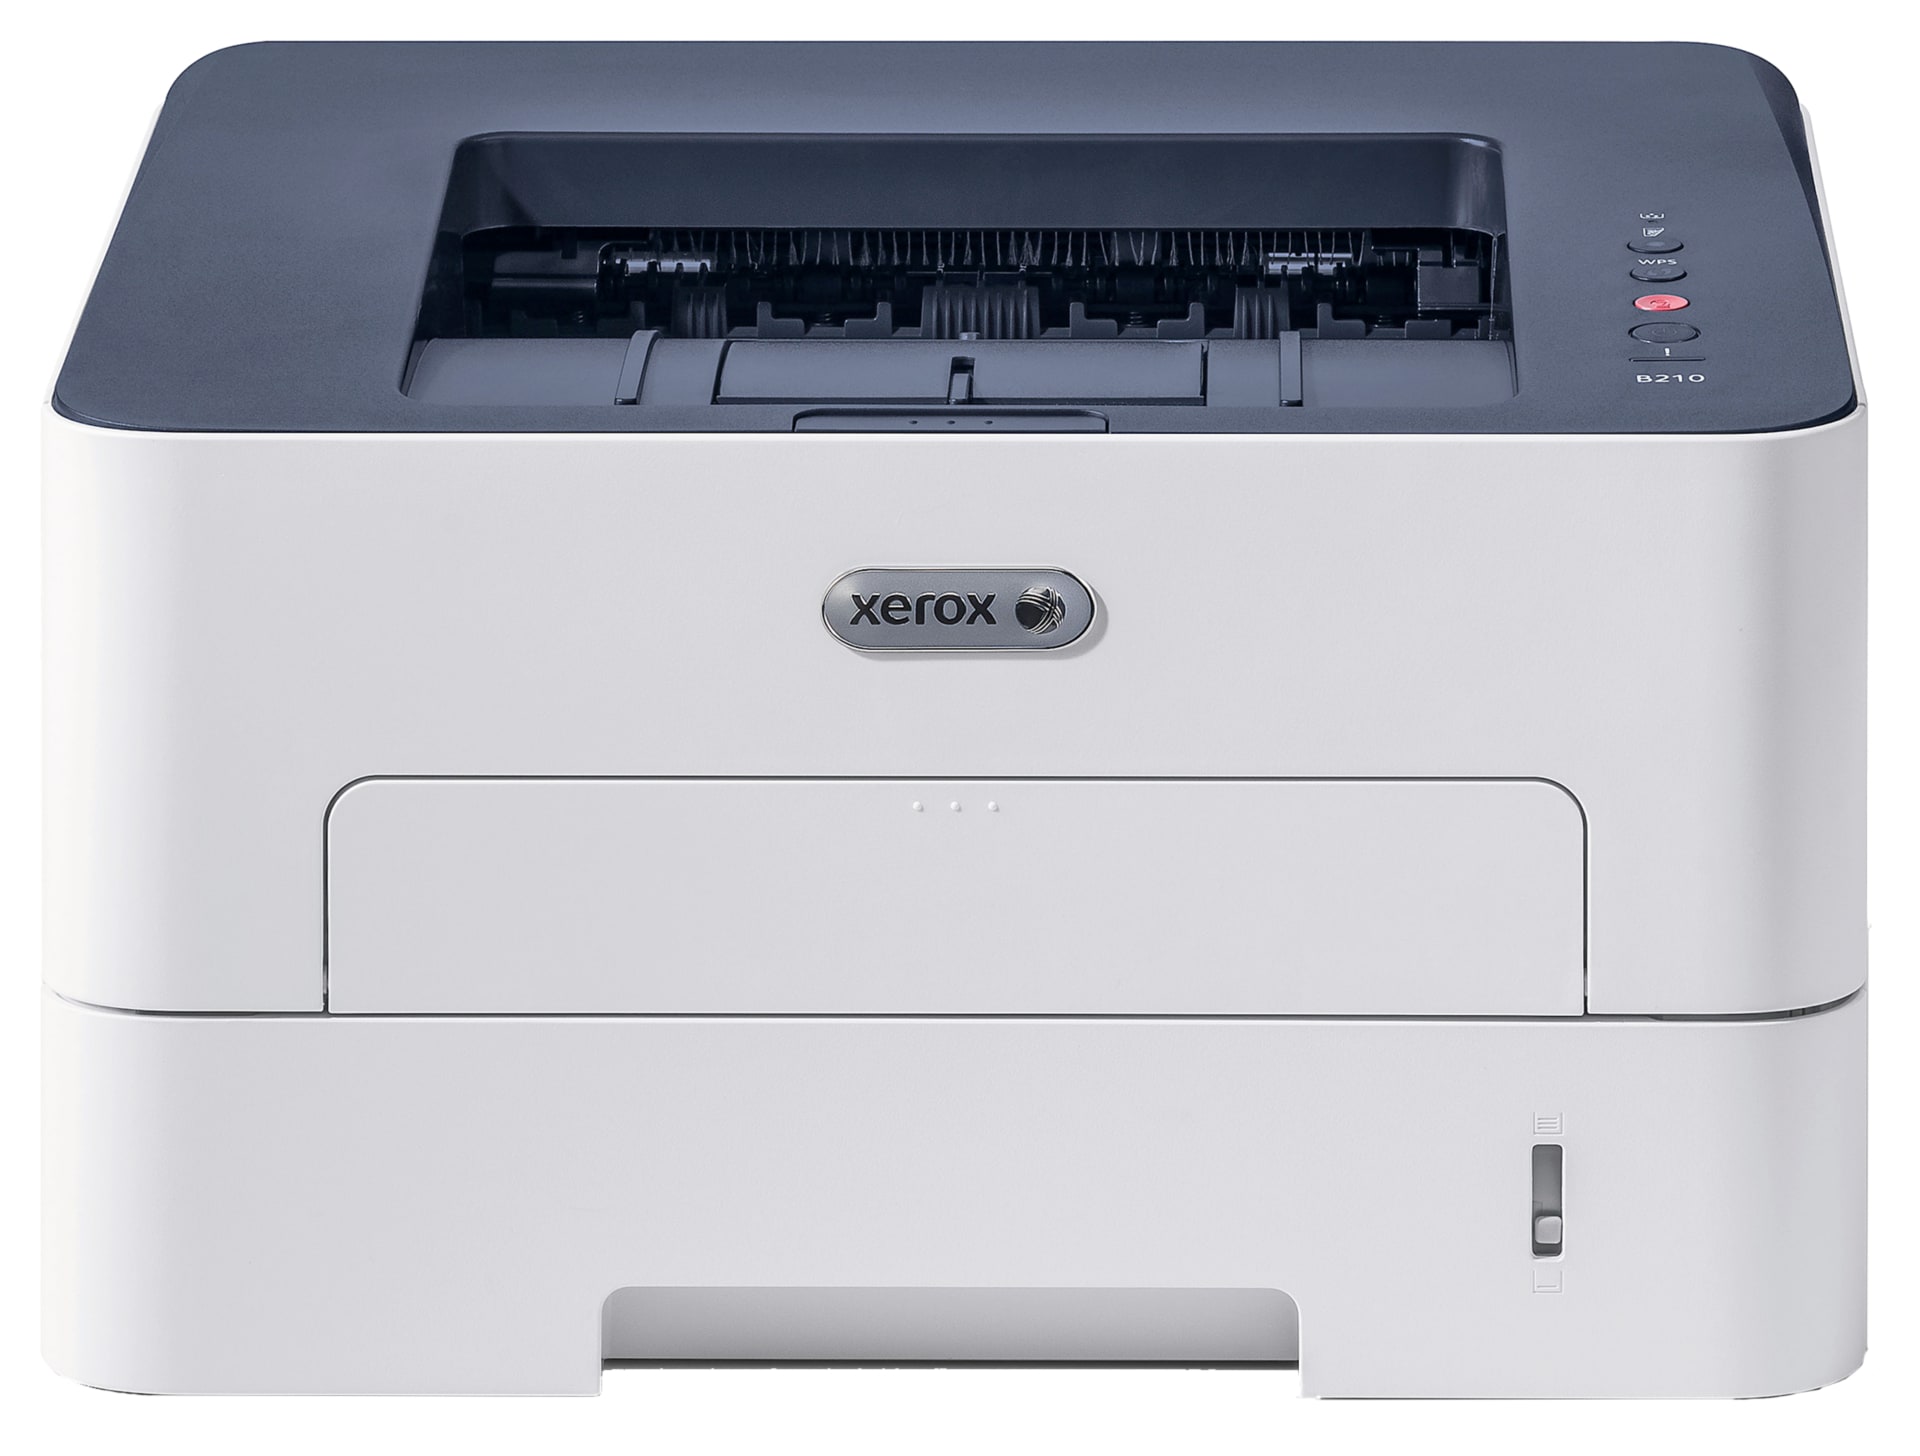 Xerox B210 31 ppm Dual-Sided Black and White Laser Printer